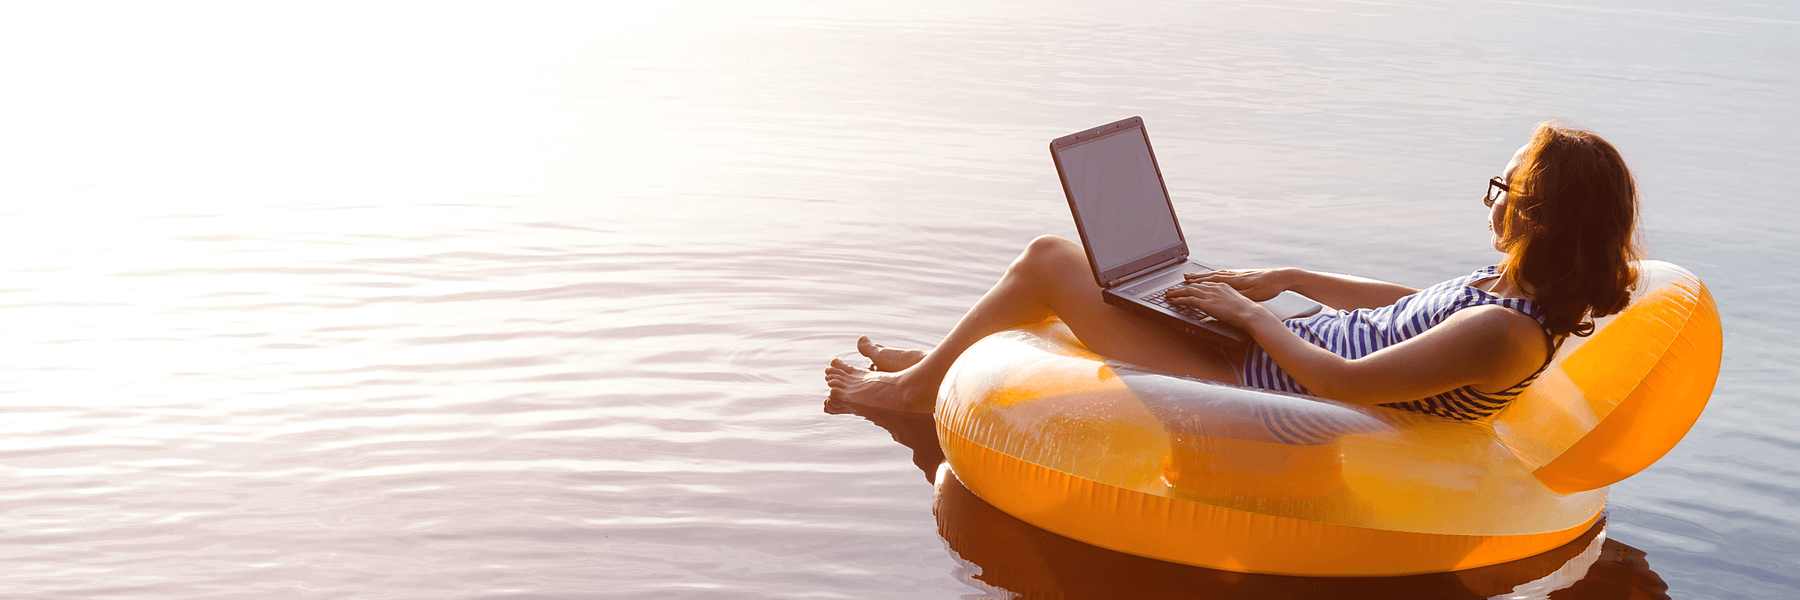 Business woman working on a laptop in an inflatable in the water